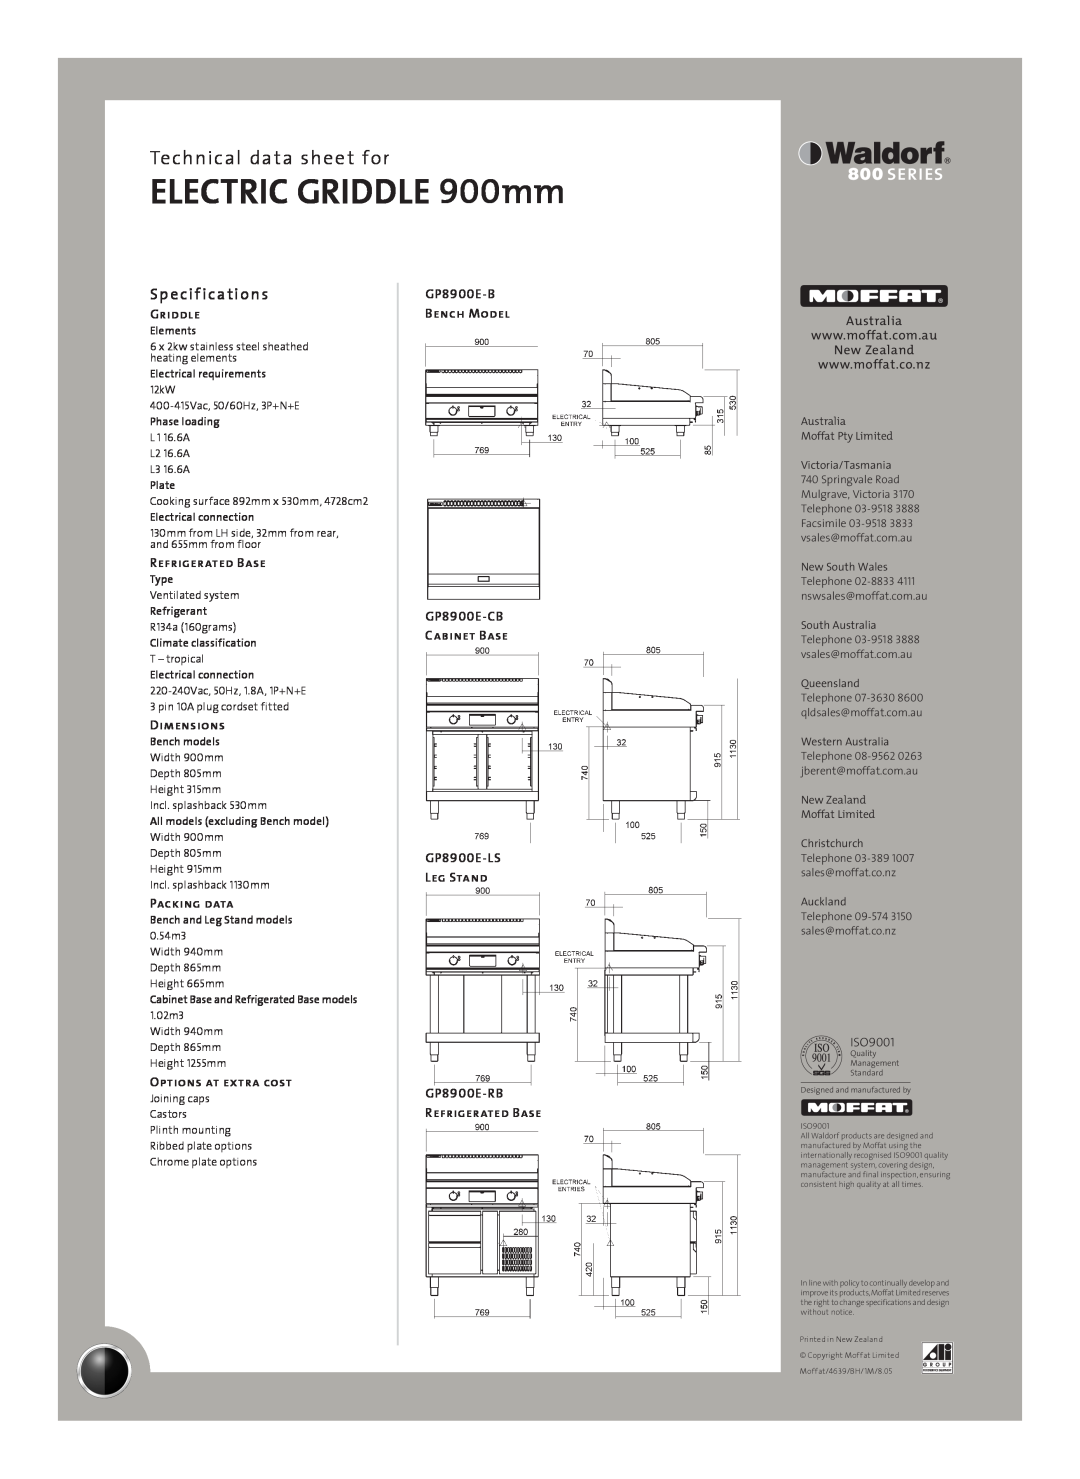 Moffat GP8900E-B manual Sp e cif ications, ELECTRIC GRIDDLE 900mm, Technical data sheet for, Griddle, Refrigerated Base 